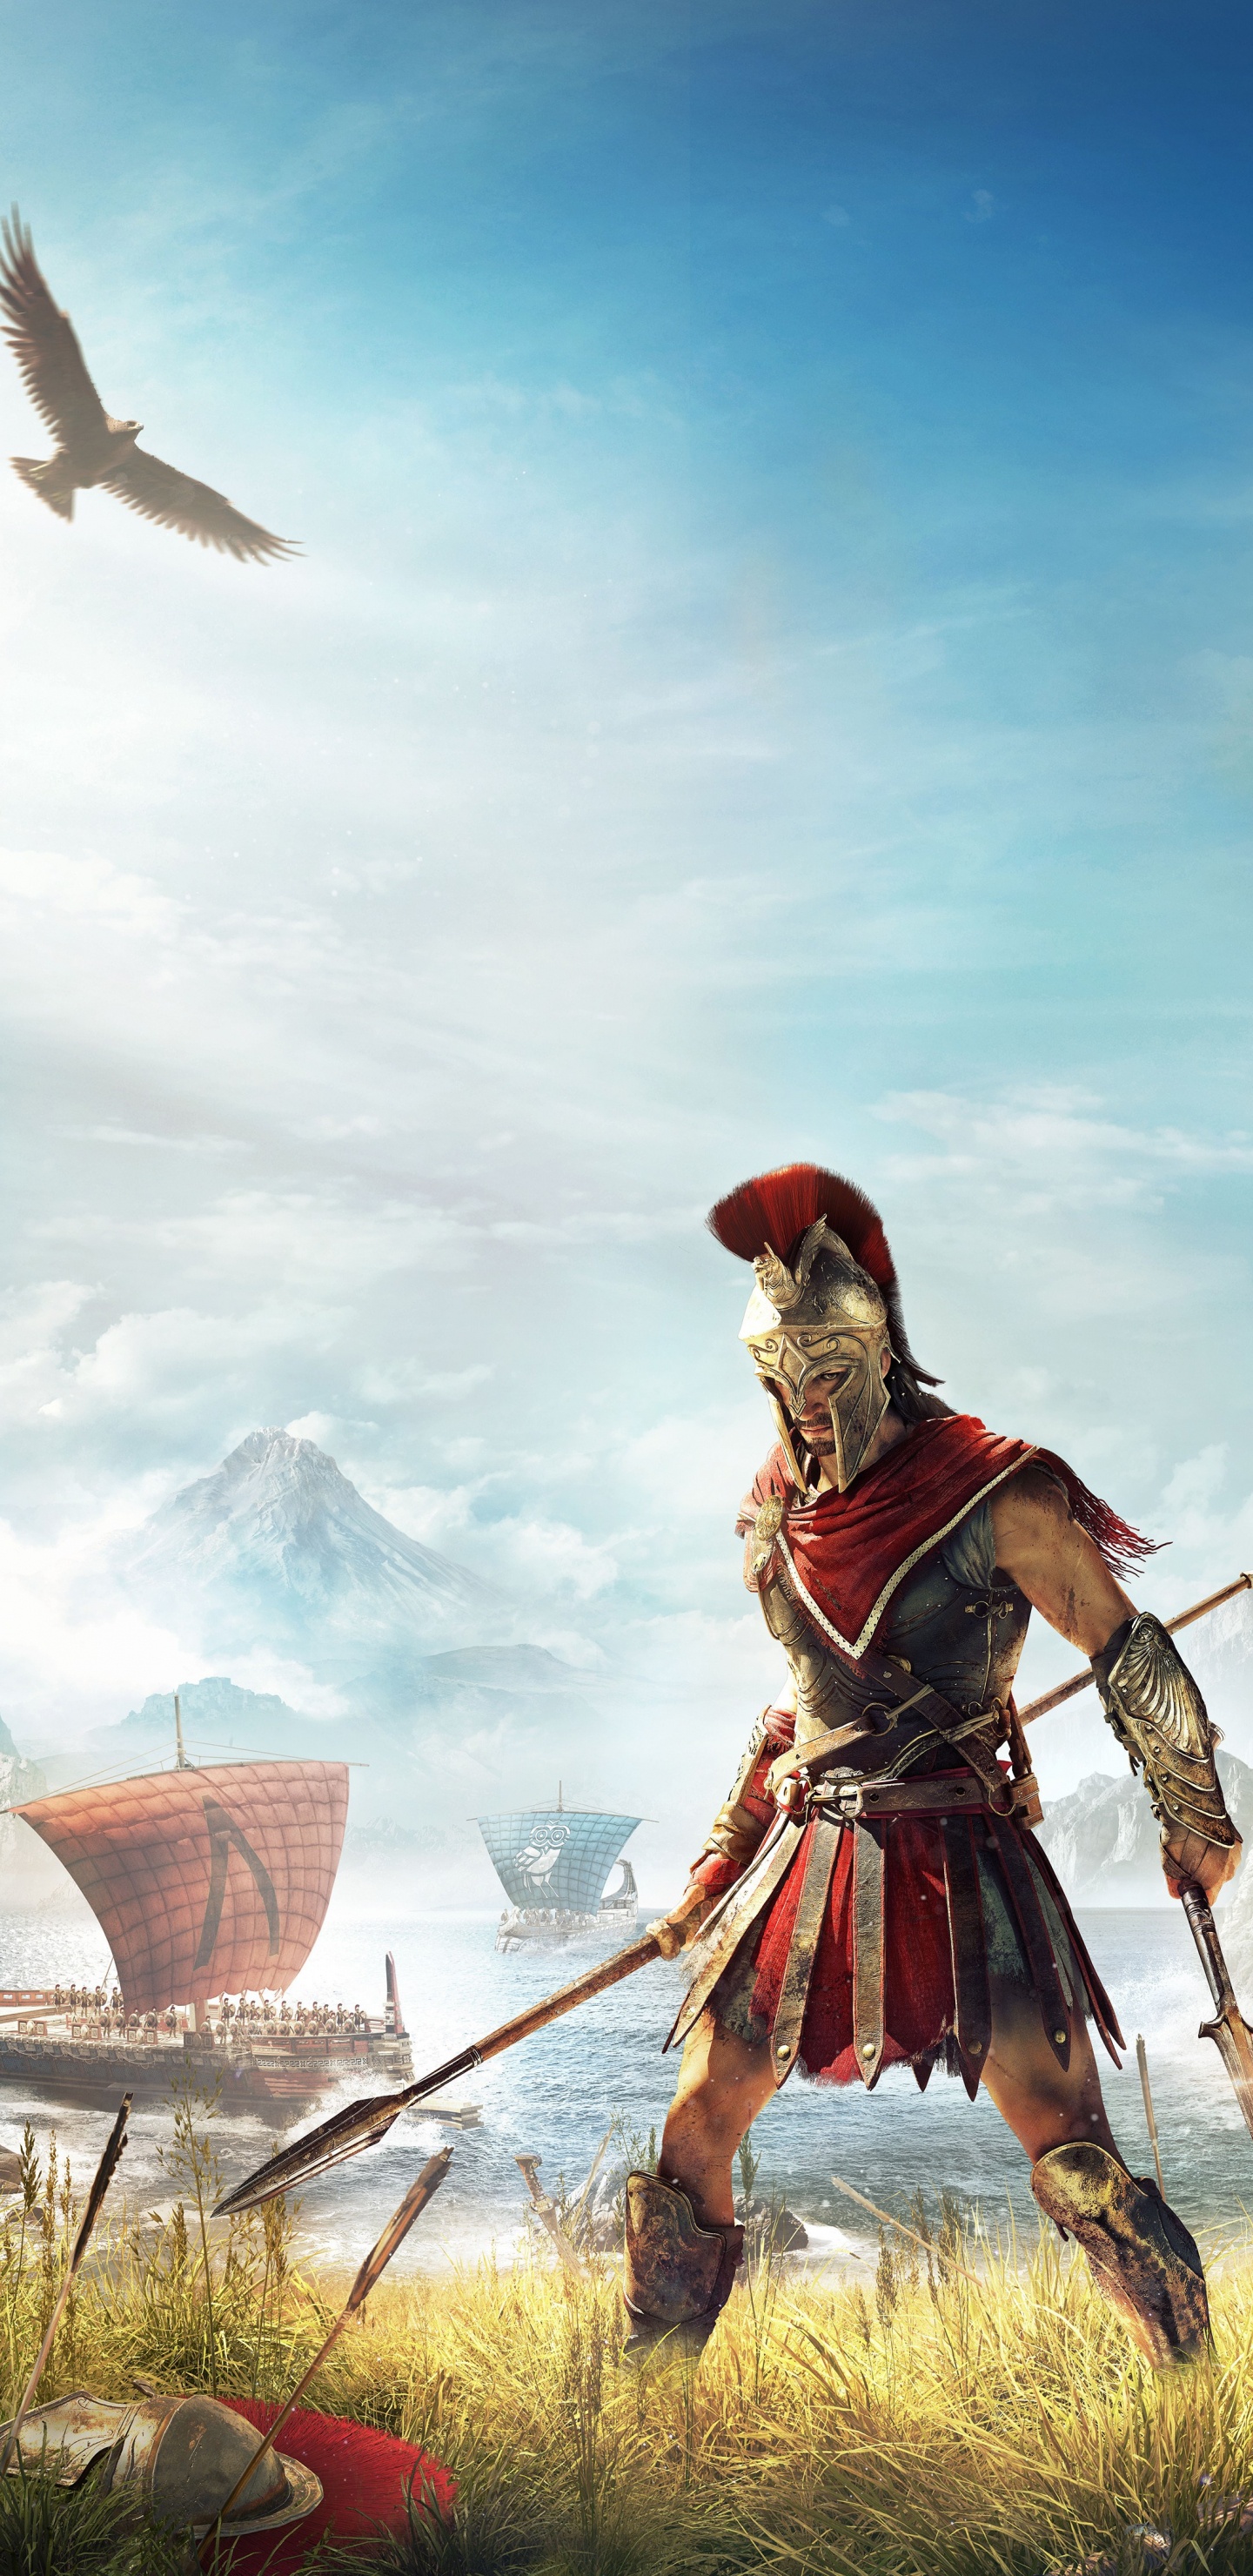 Assassins Creed Odyssey, Ubisoft, pc Game, Games, Mythology. Wallpaper in 1440x2960 Resolution